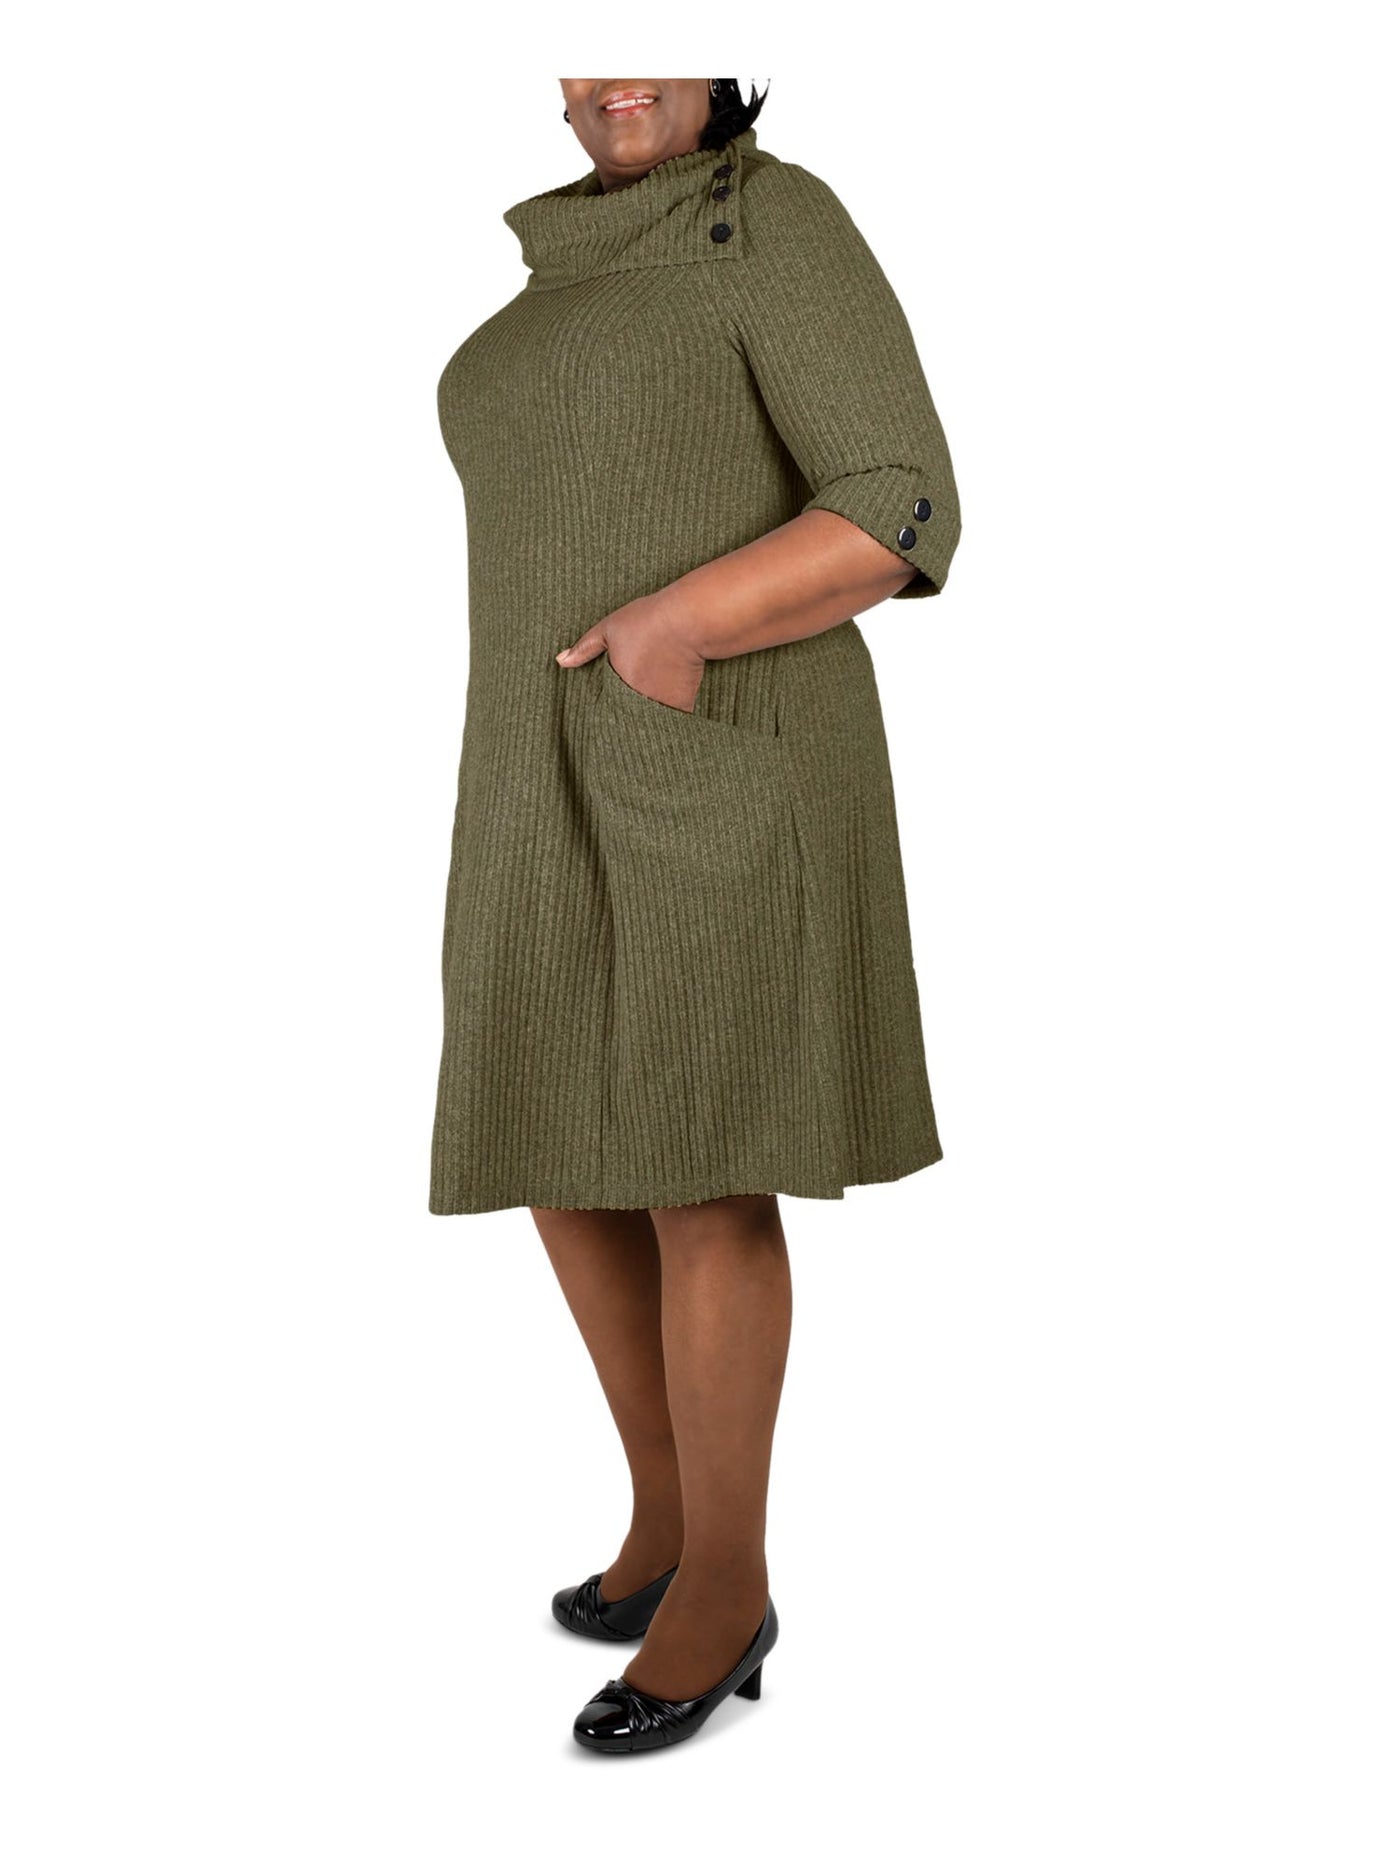 SIGNATURE BY ROBBIE BEE Womens Green Cowl Neck Knee Length Wear To Work Shift Dress Plus 1X